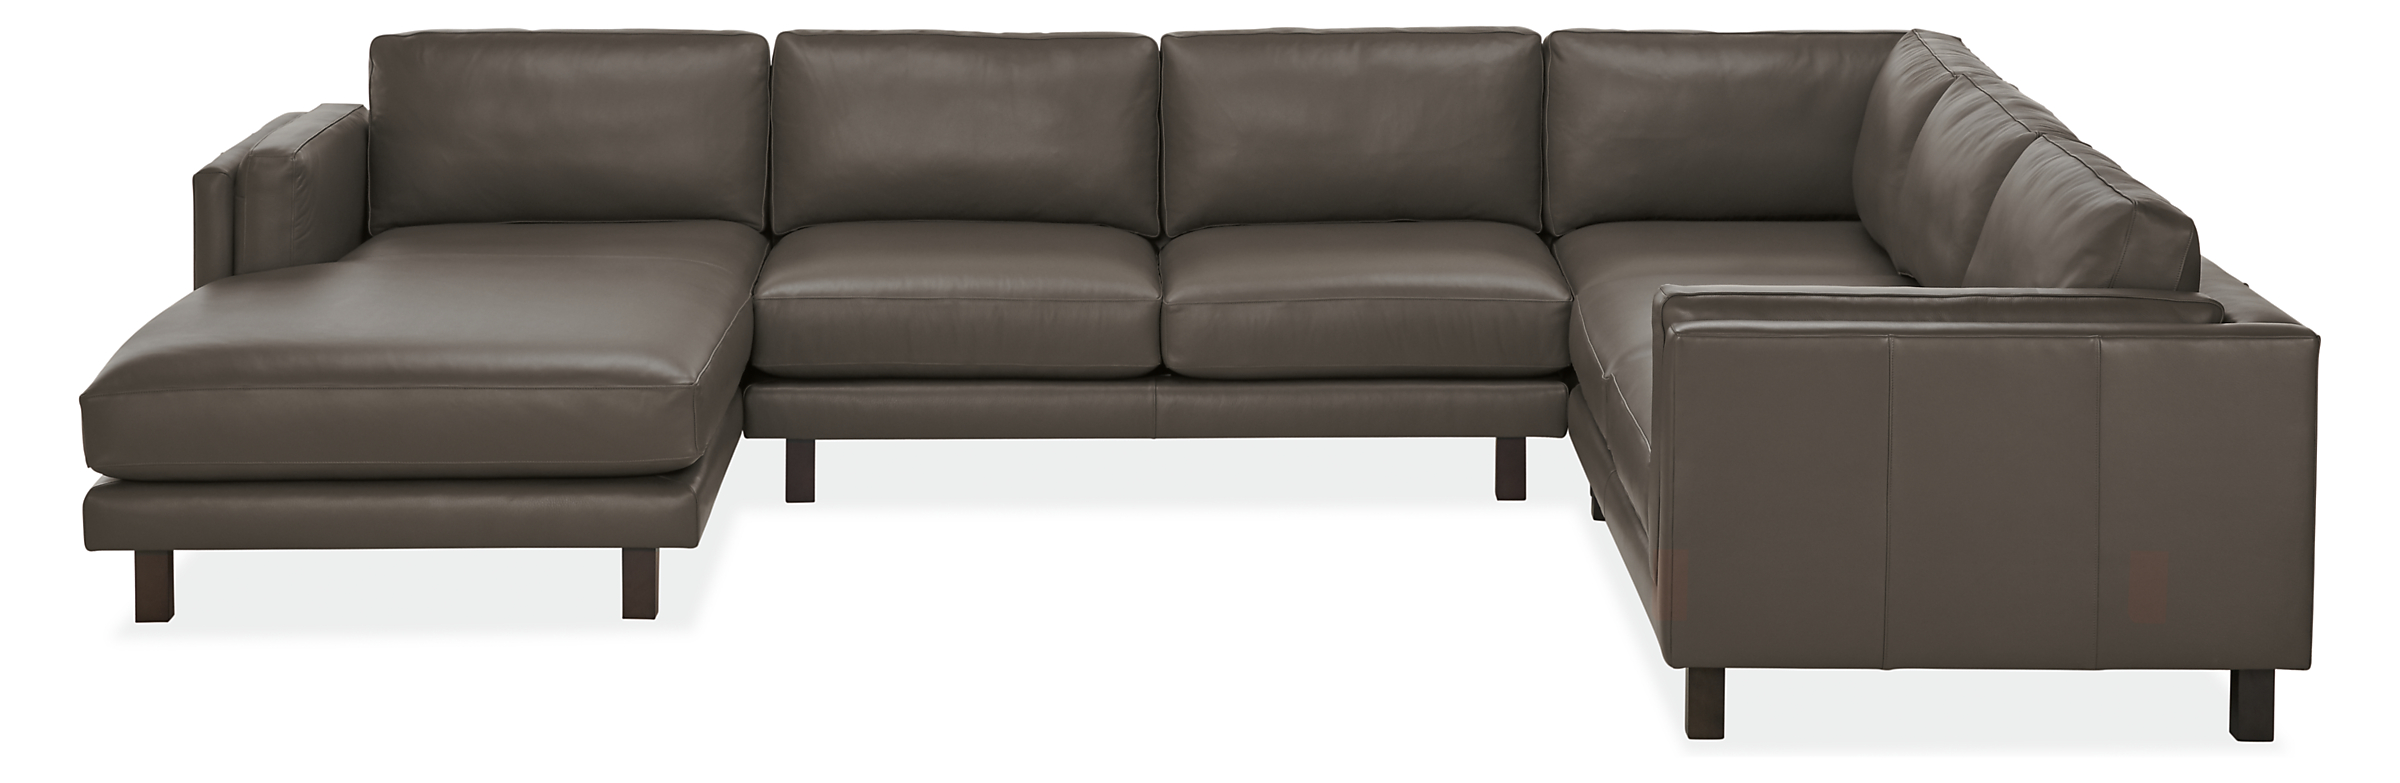 Cade Leather Sectional